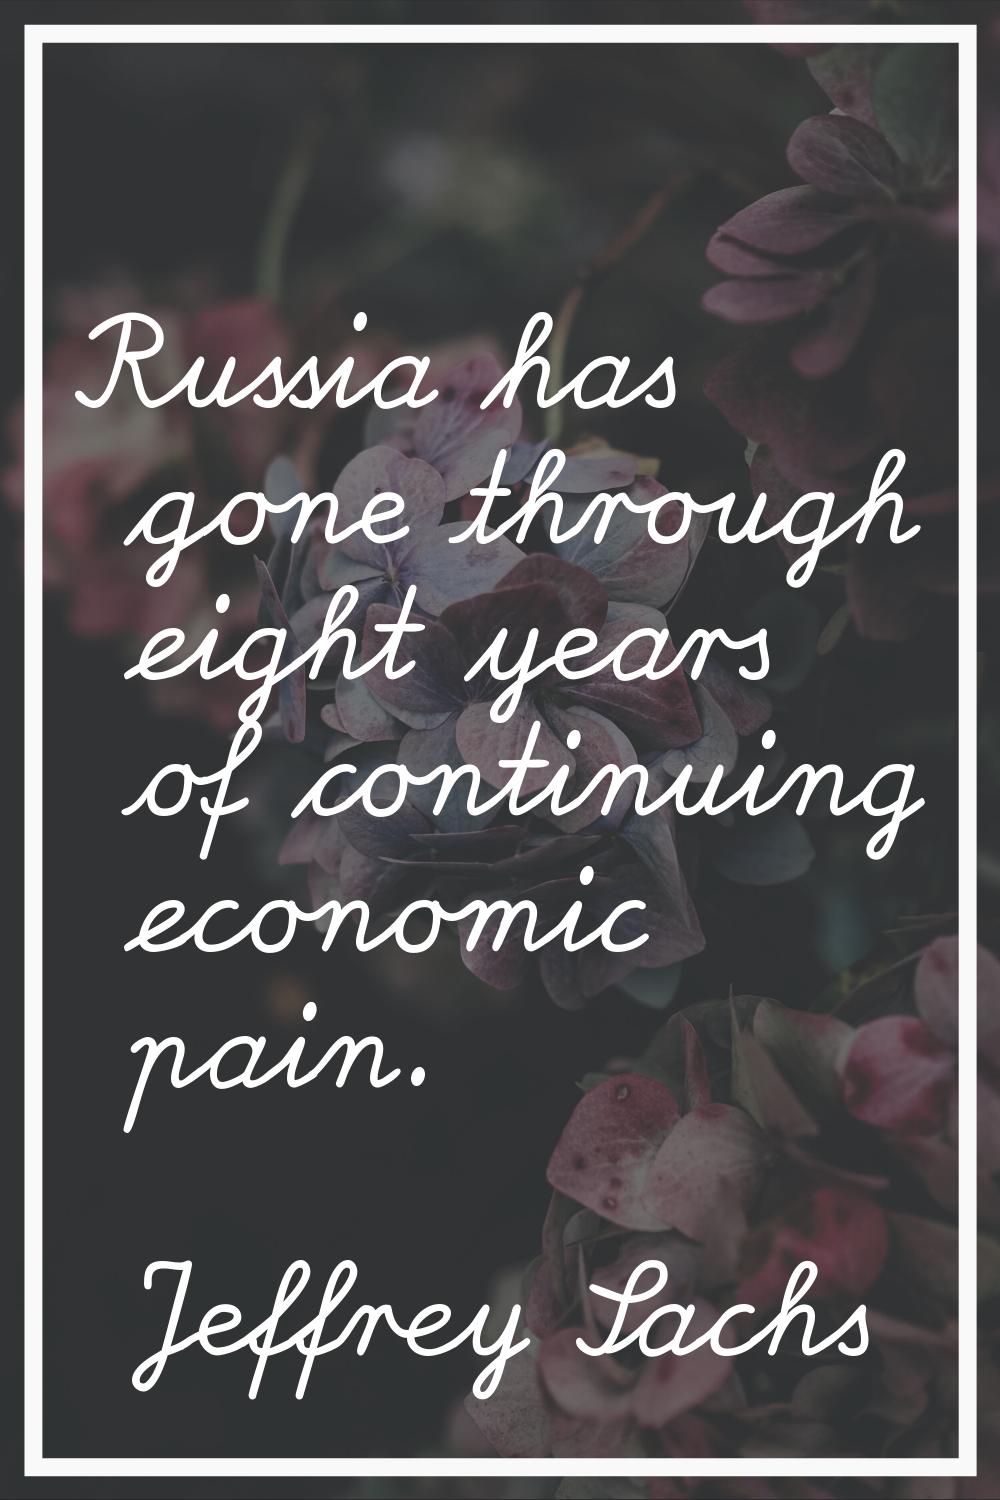 Russia has gone through eight years of continuing economic pain.